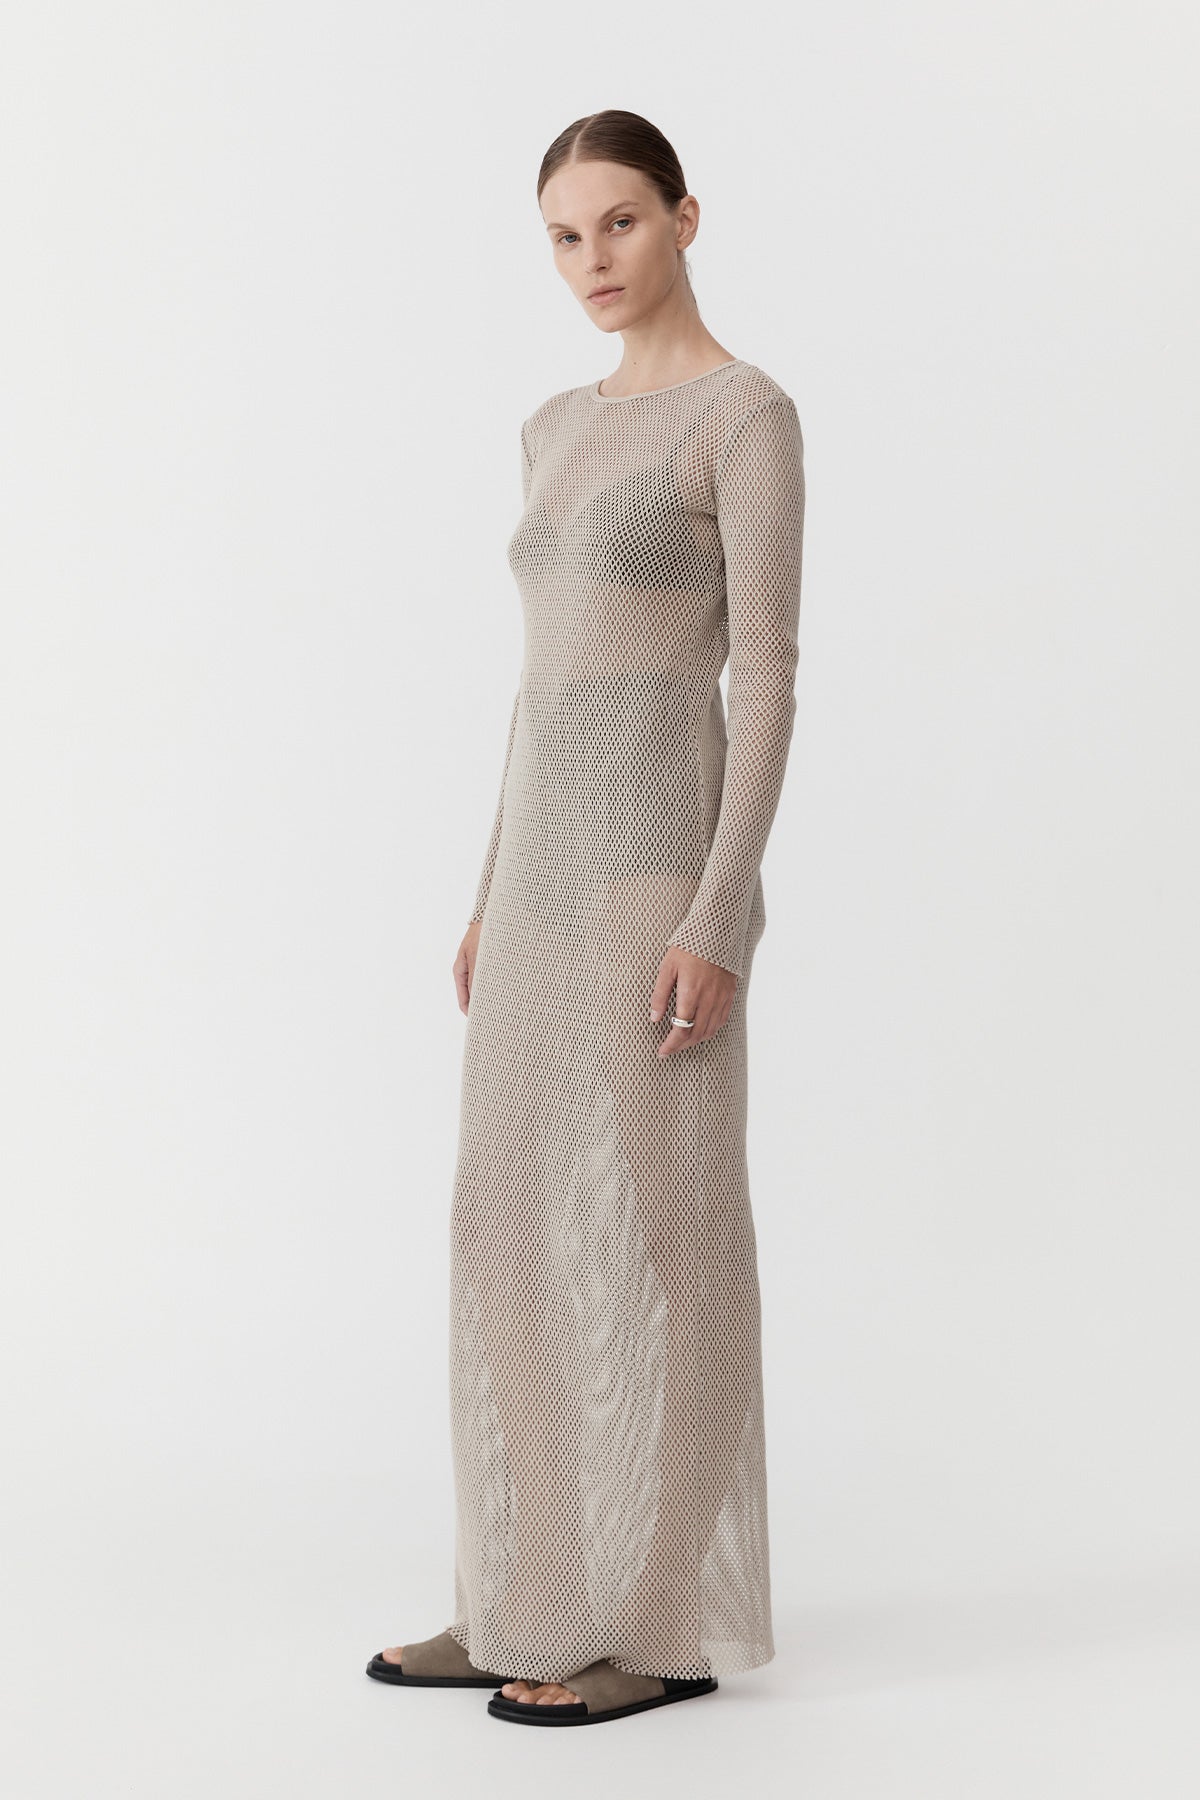 The St Agni Mesh Long Sleeve Dress in Aloe available at The New Trend Australia